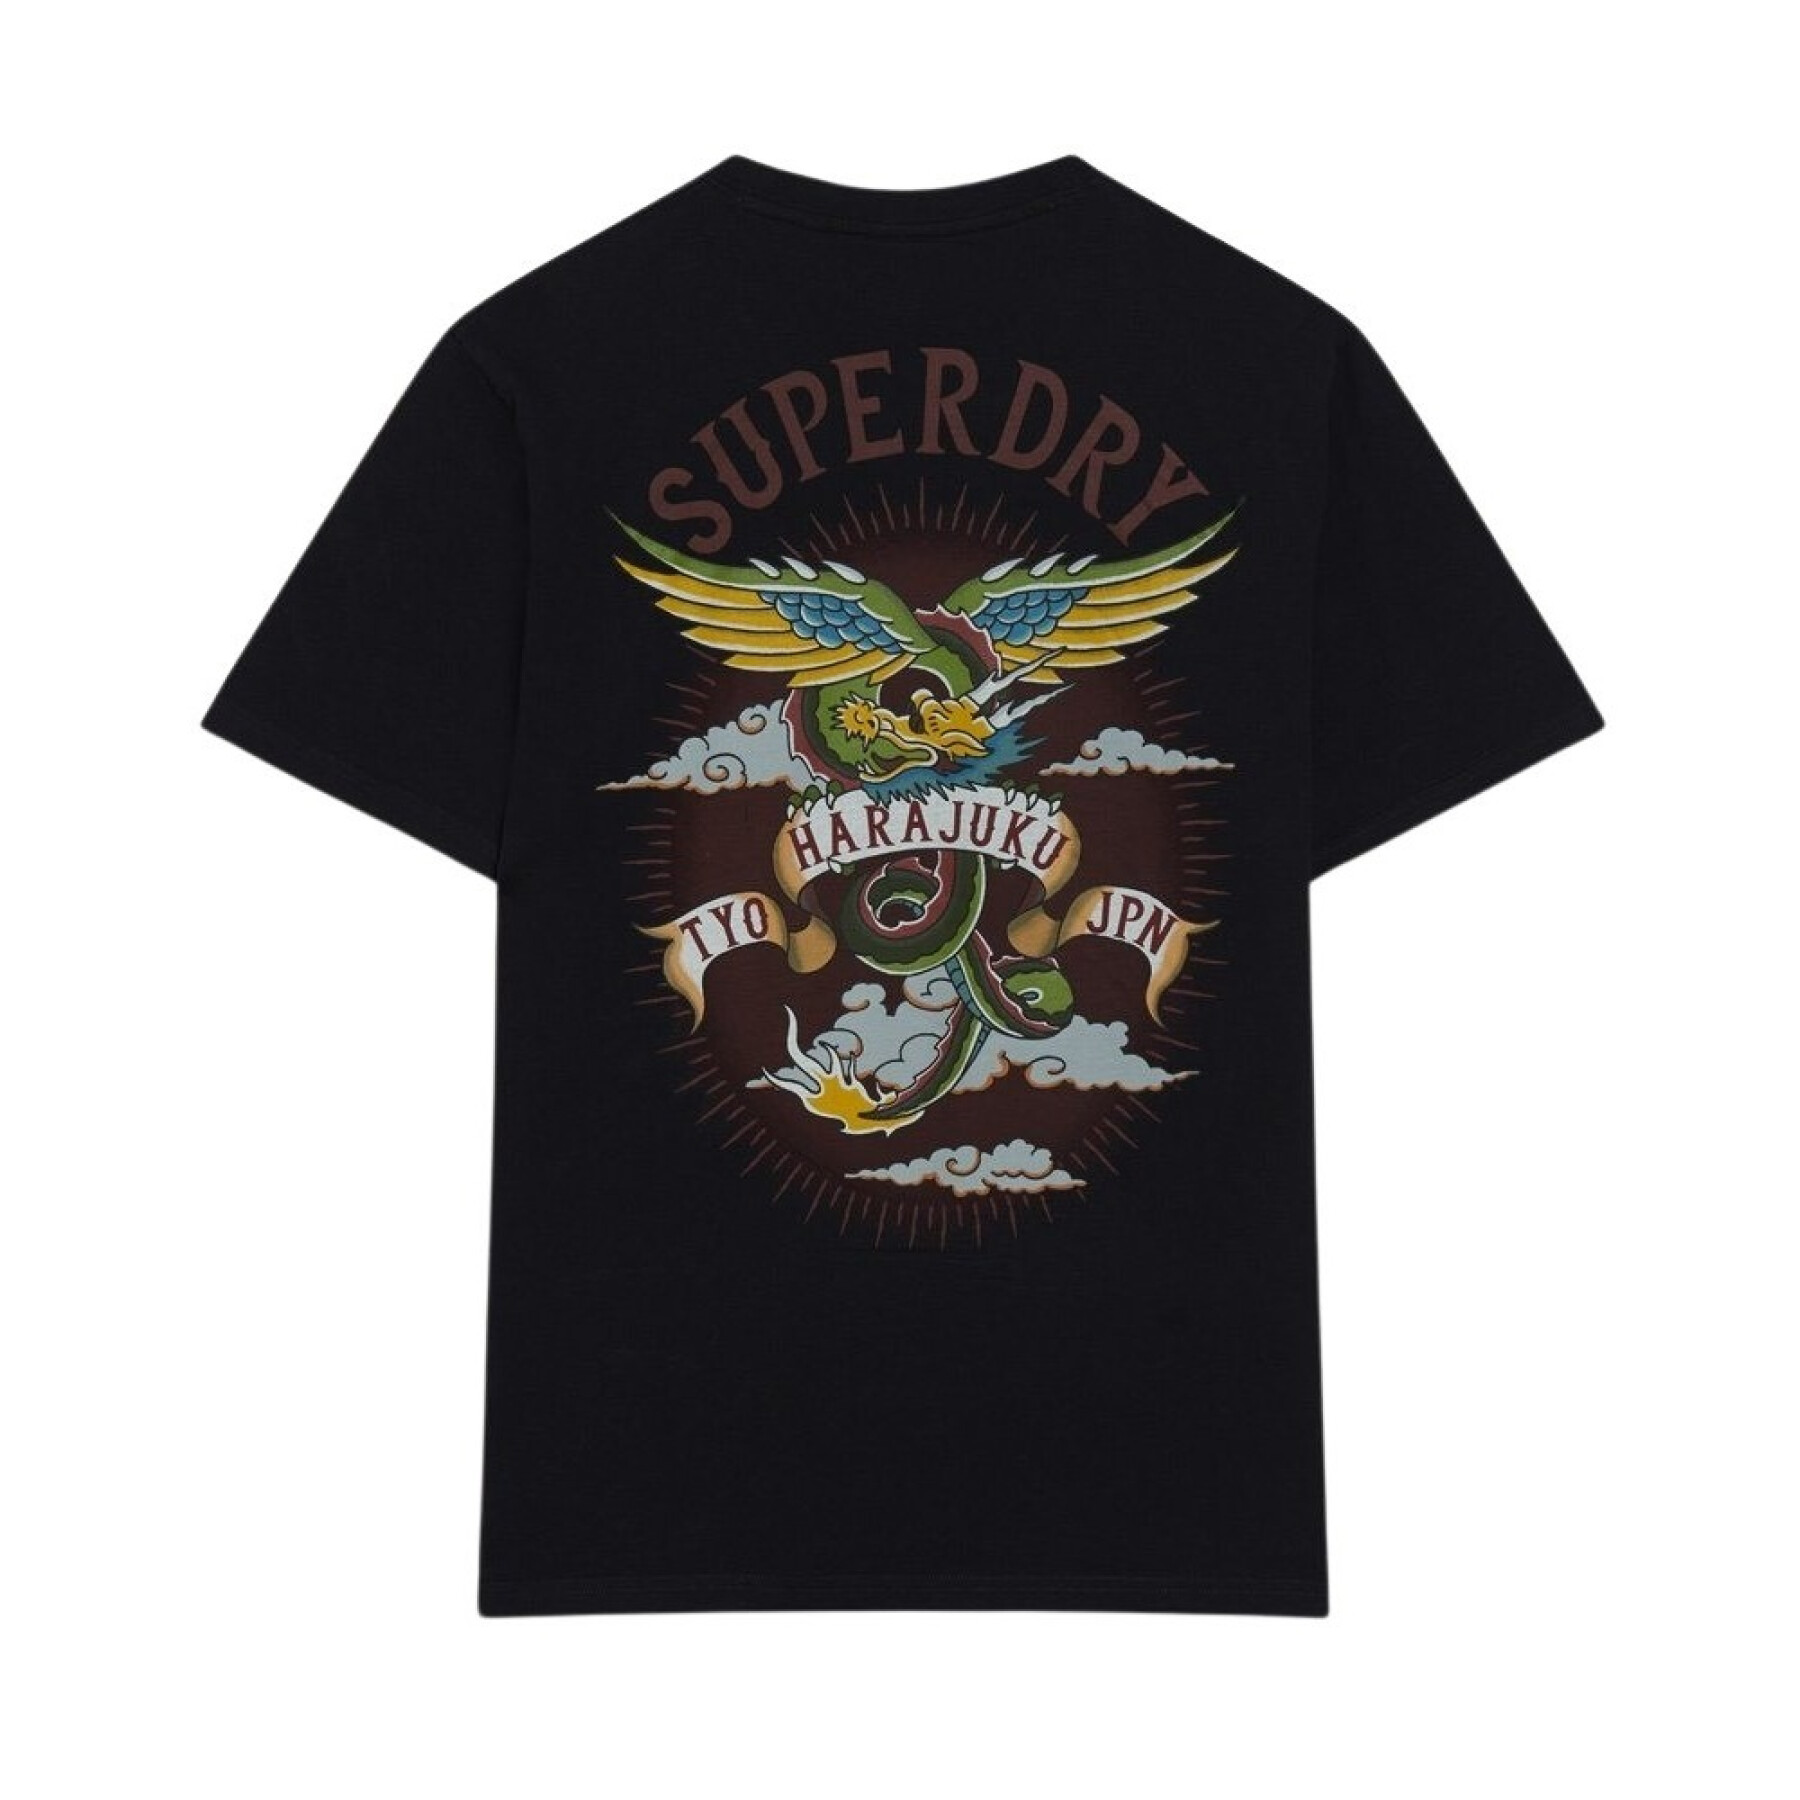 Loose T-shirt Superdry Tattoo